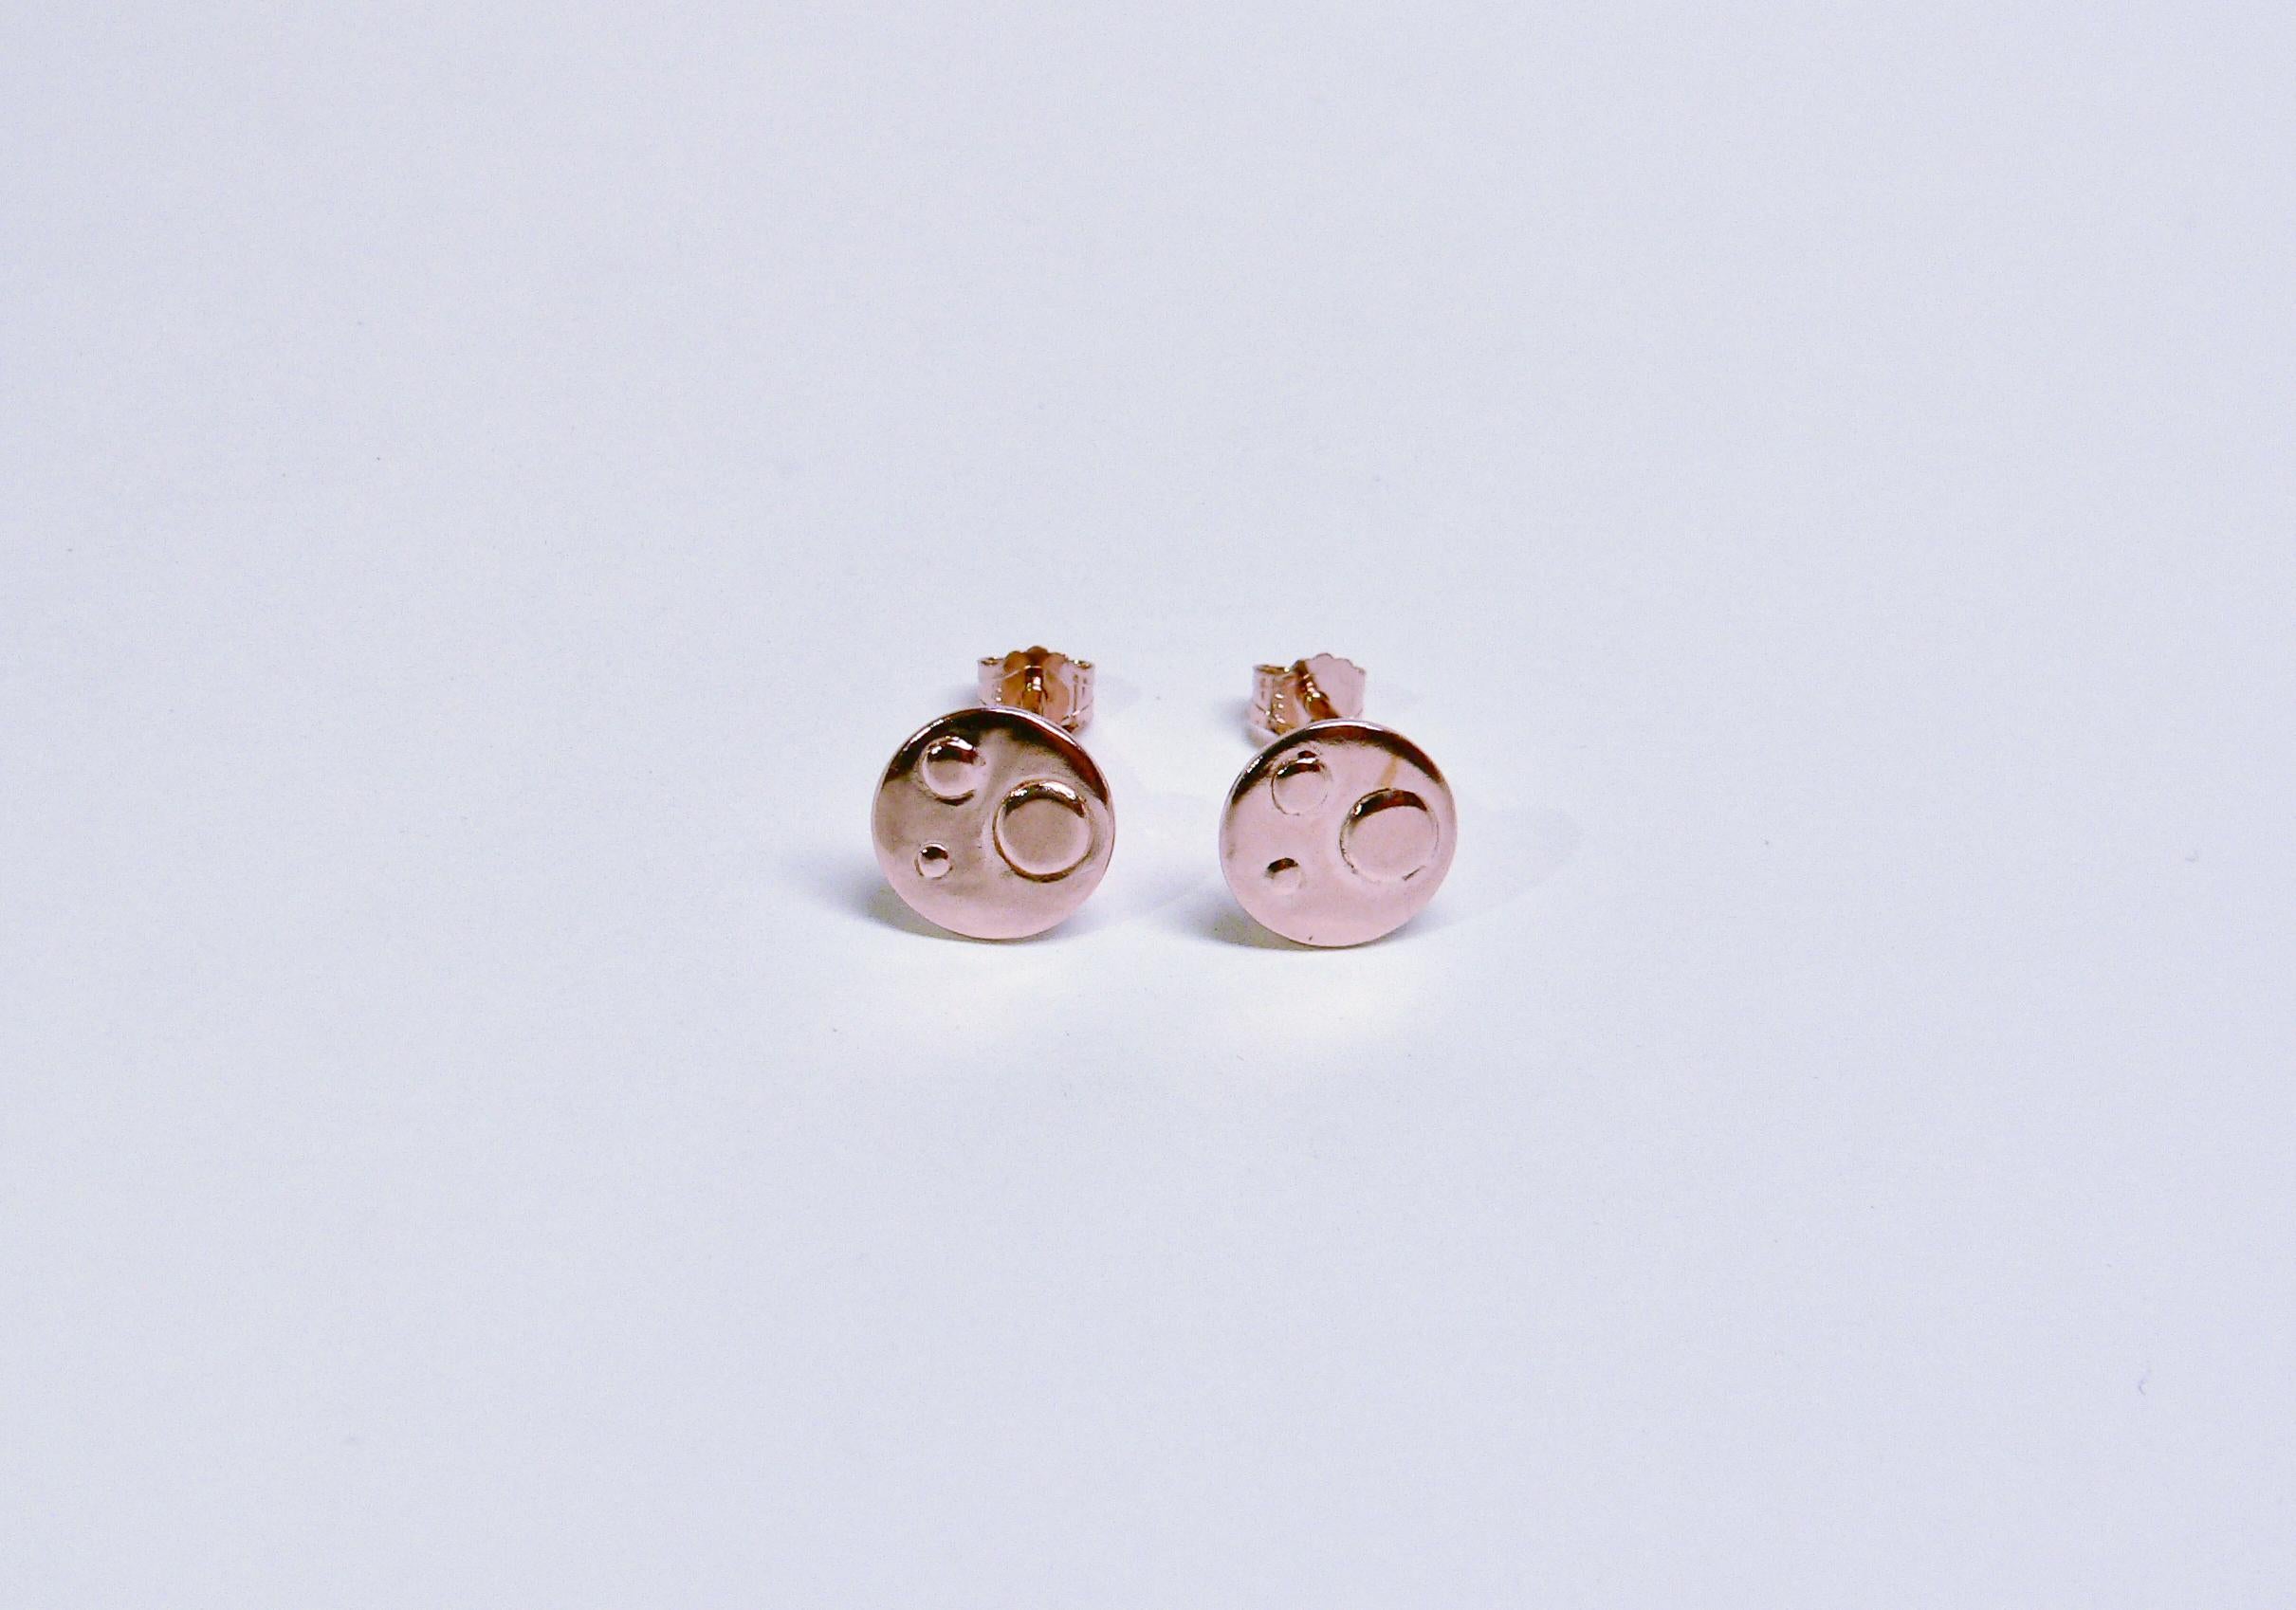 Three Dots Stud Earring (Pair), Pink Gold-Plated Sterling Silver For Sale 1